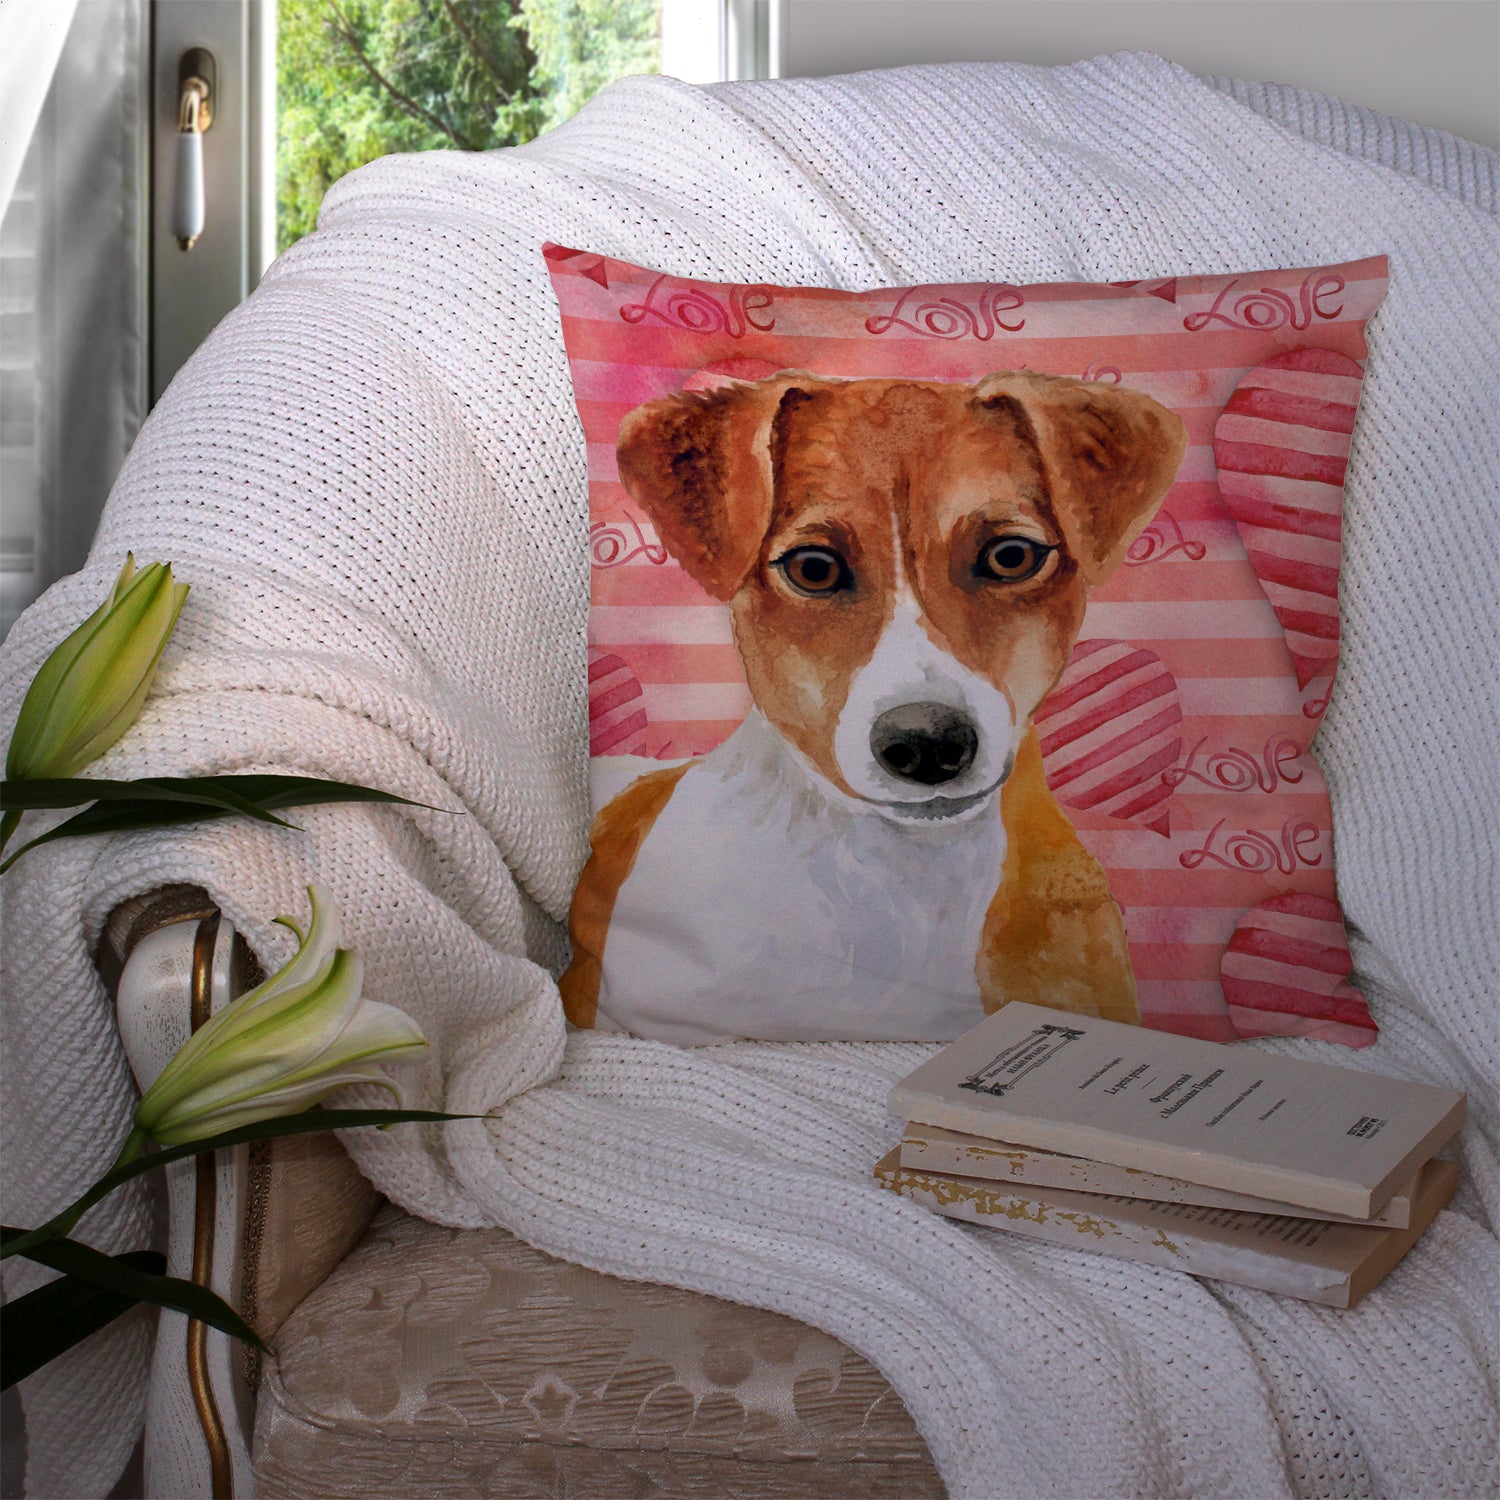 Jack Russell Terrier Love Fabric Decorative Pillow BB9776PW1414 - the-store.com